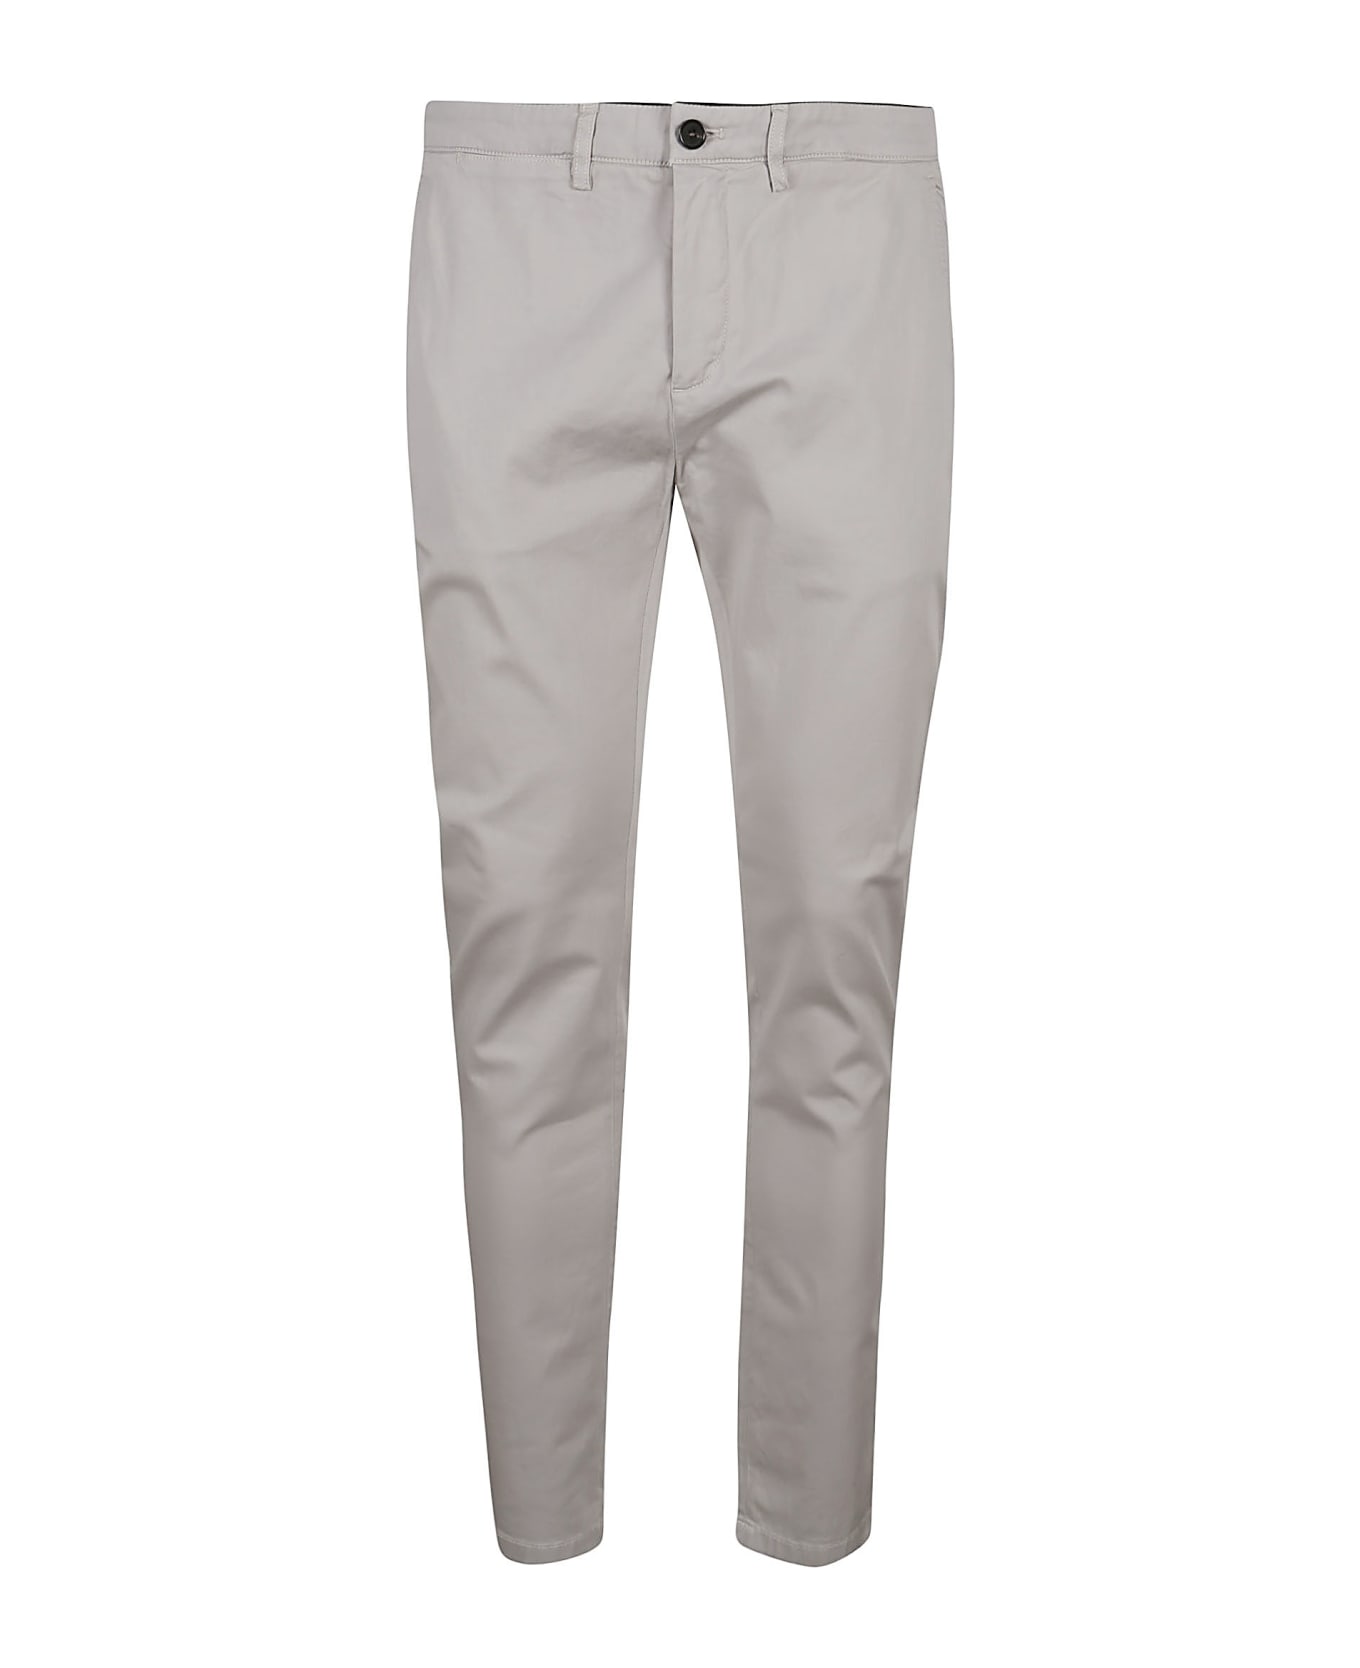 Department Five Mike Chinos Superslim Pant - Stucco